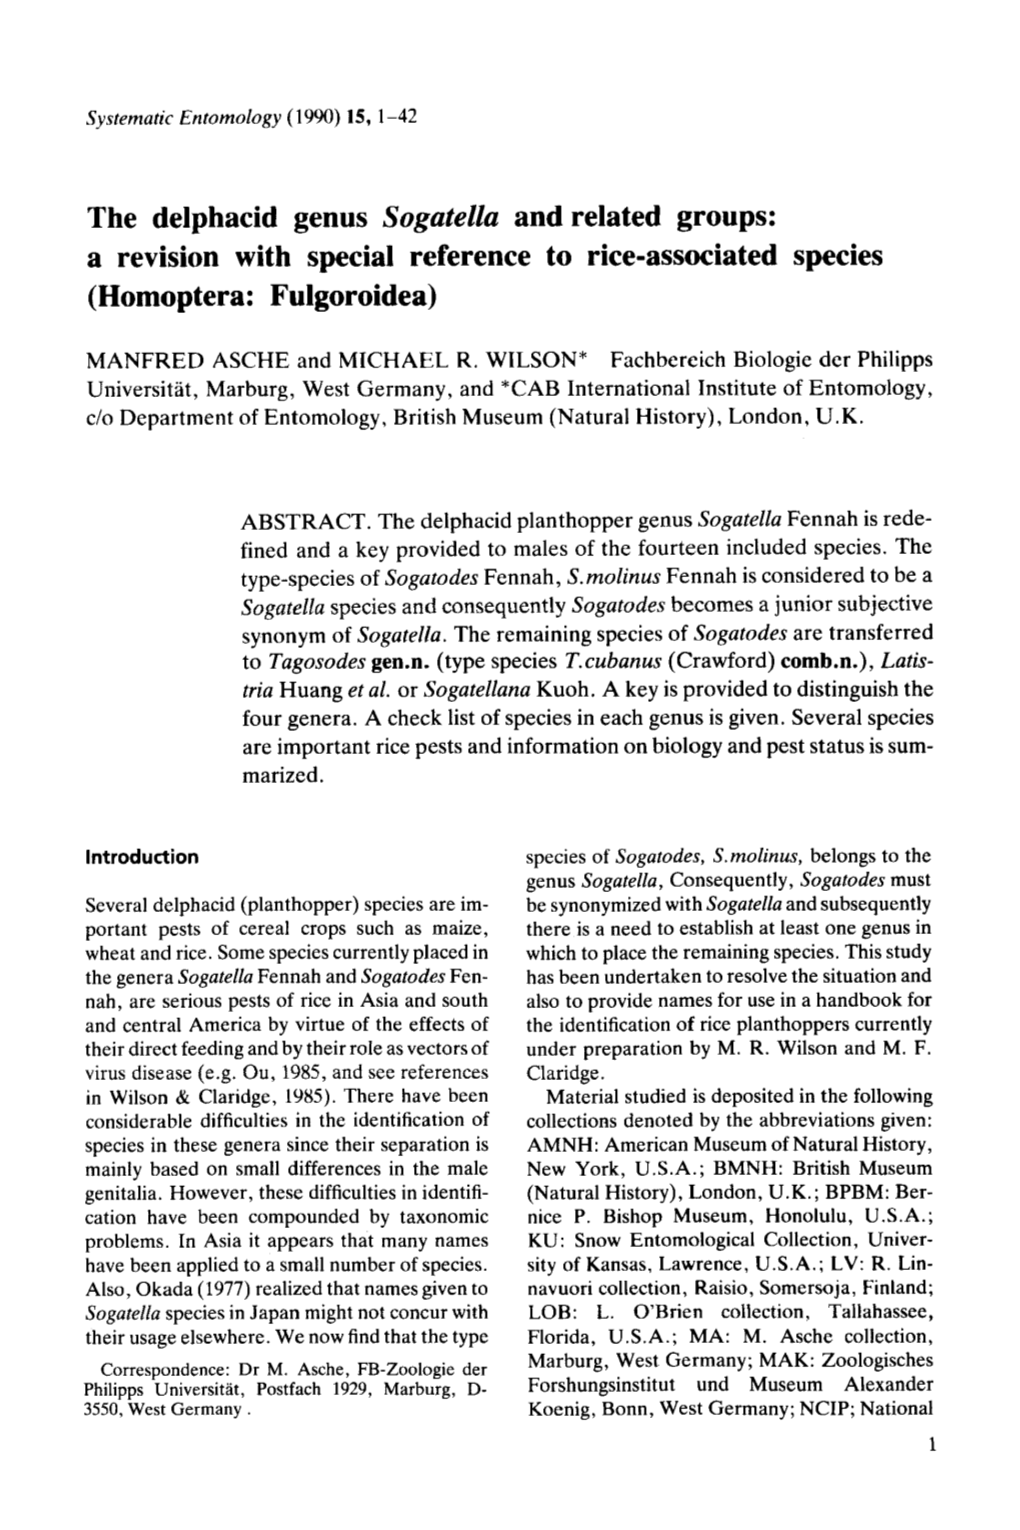 The Delphacid Genus Sogatella and Related Groups: a Revision with Special Reference to Rice-Associated Species (Hornoptera: Fulgoroidea)